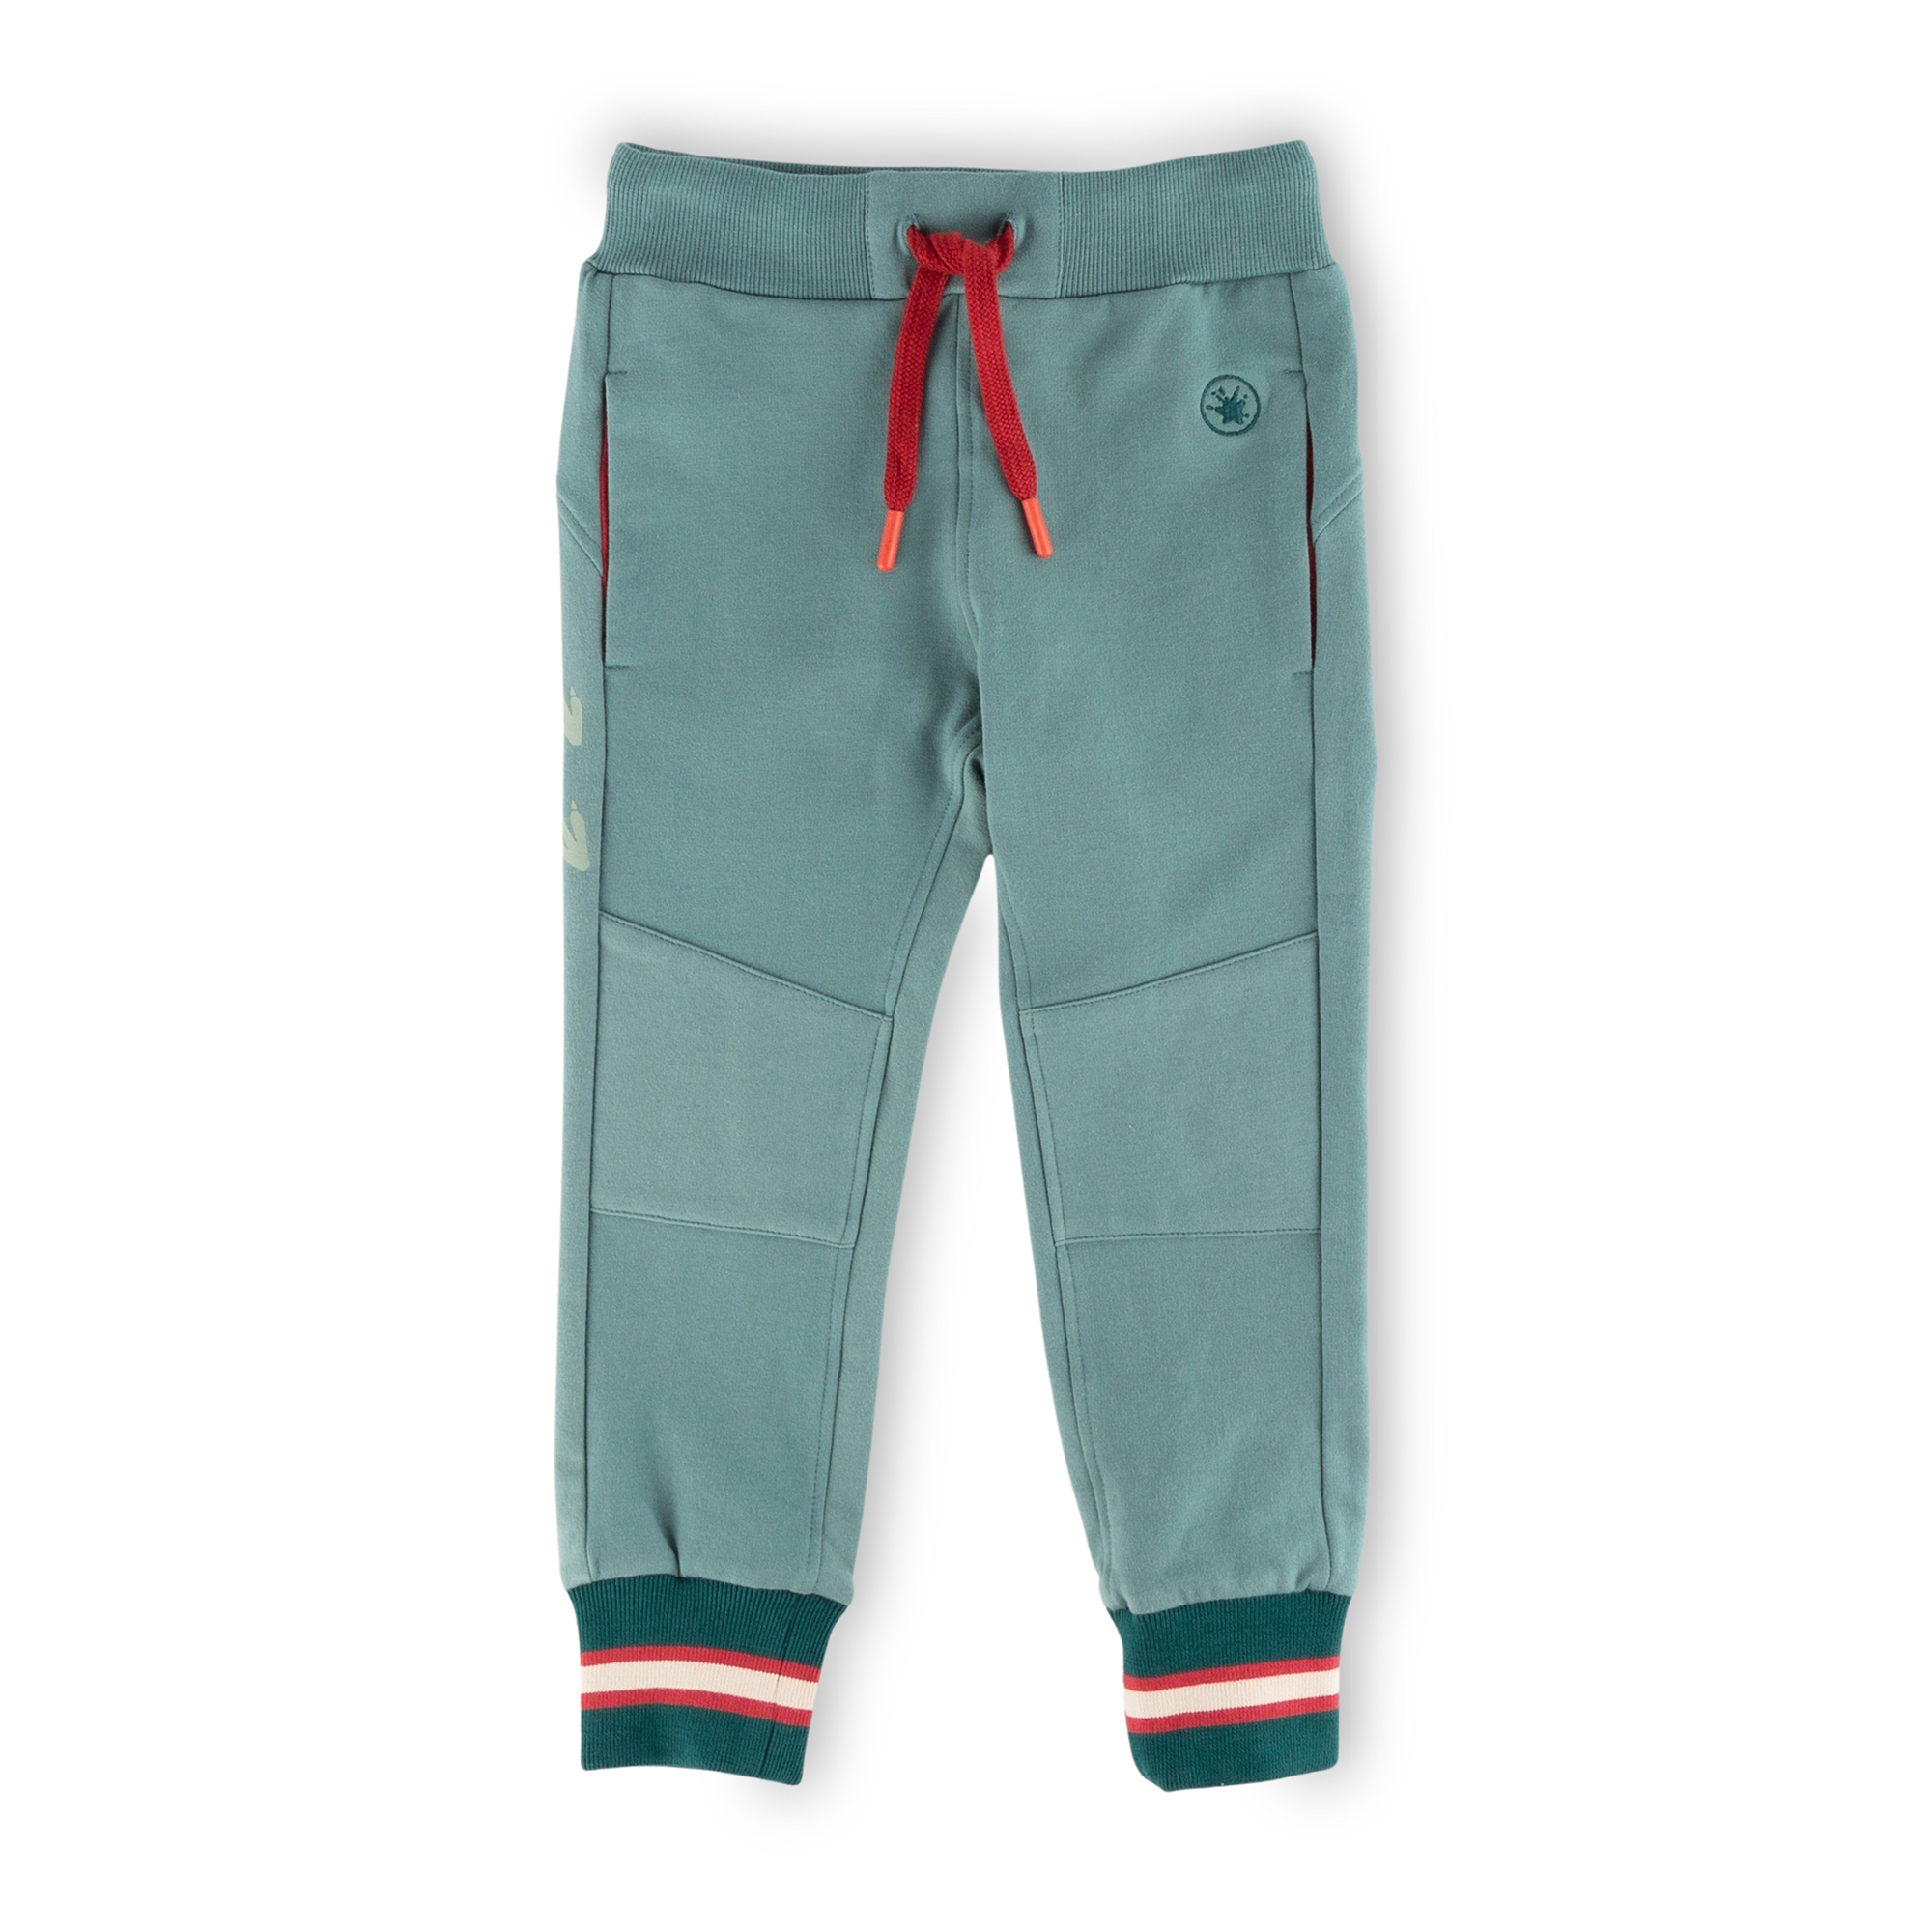 Children's sweat pants, back with dino footprints